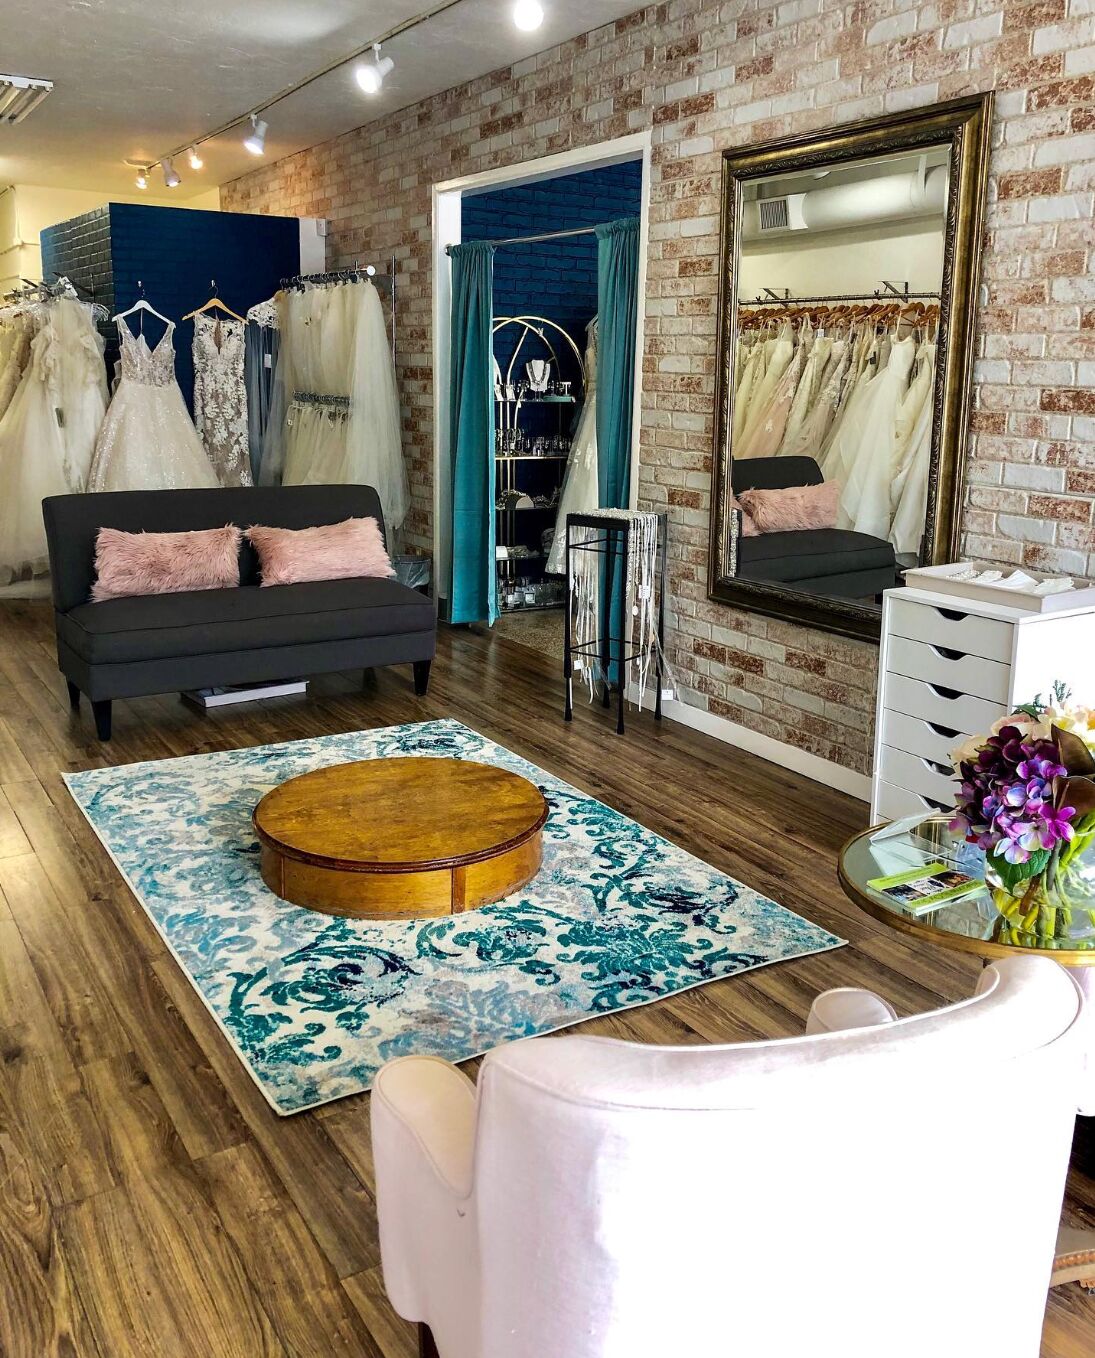 The 8 Best Bridal Boutiques in the Tampa Bay Area